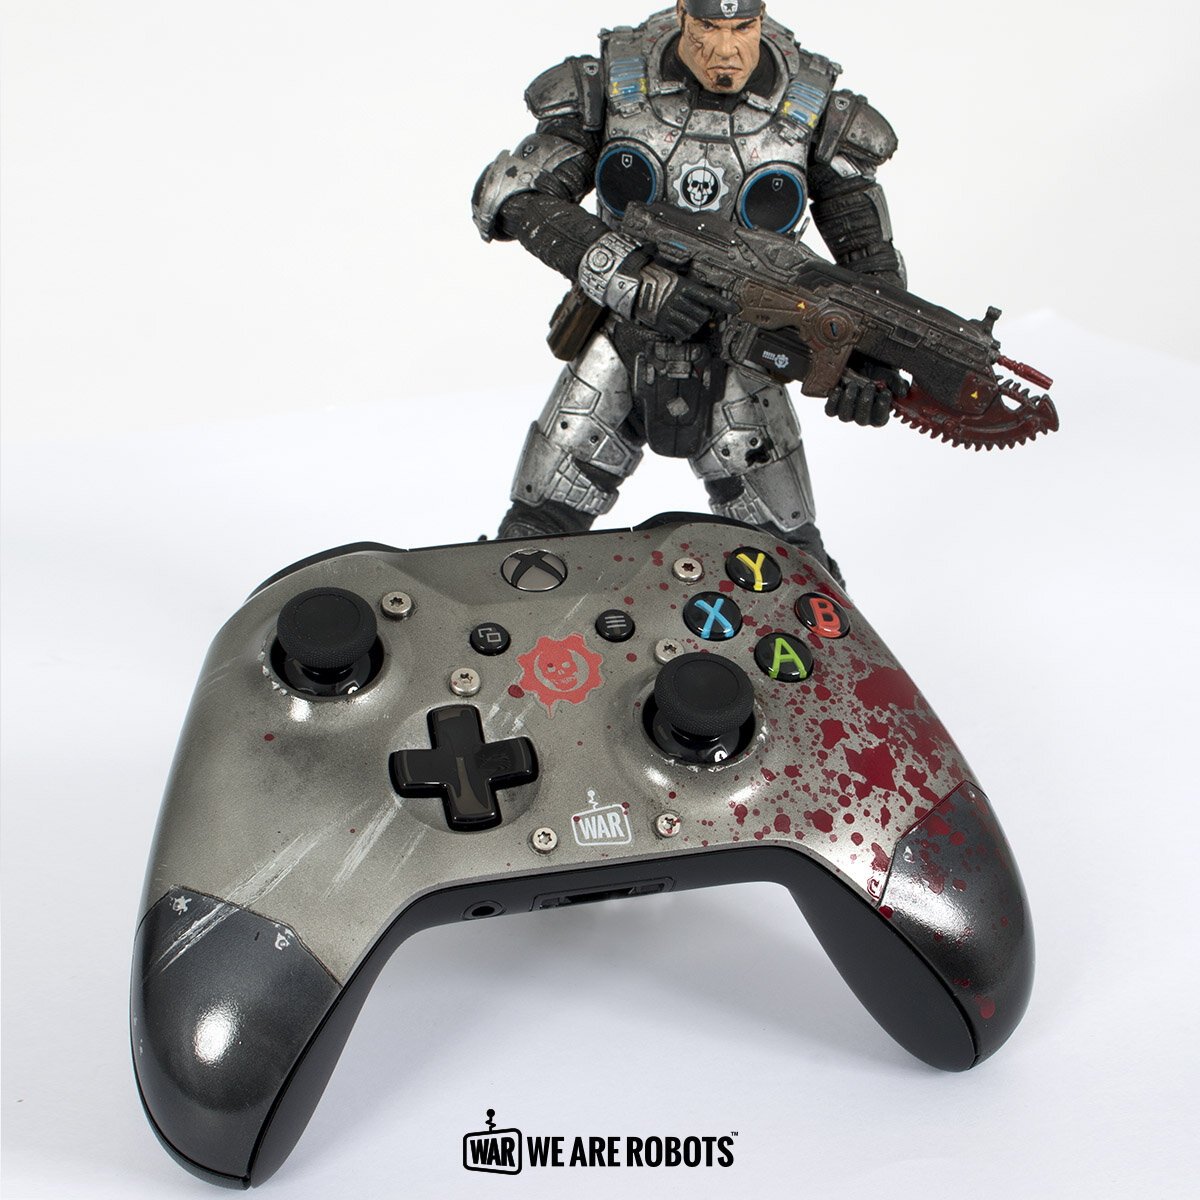 We Are Robots - Gears of War Xbox Controller